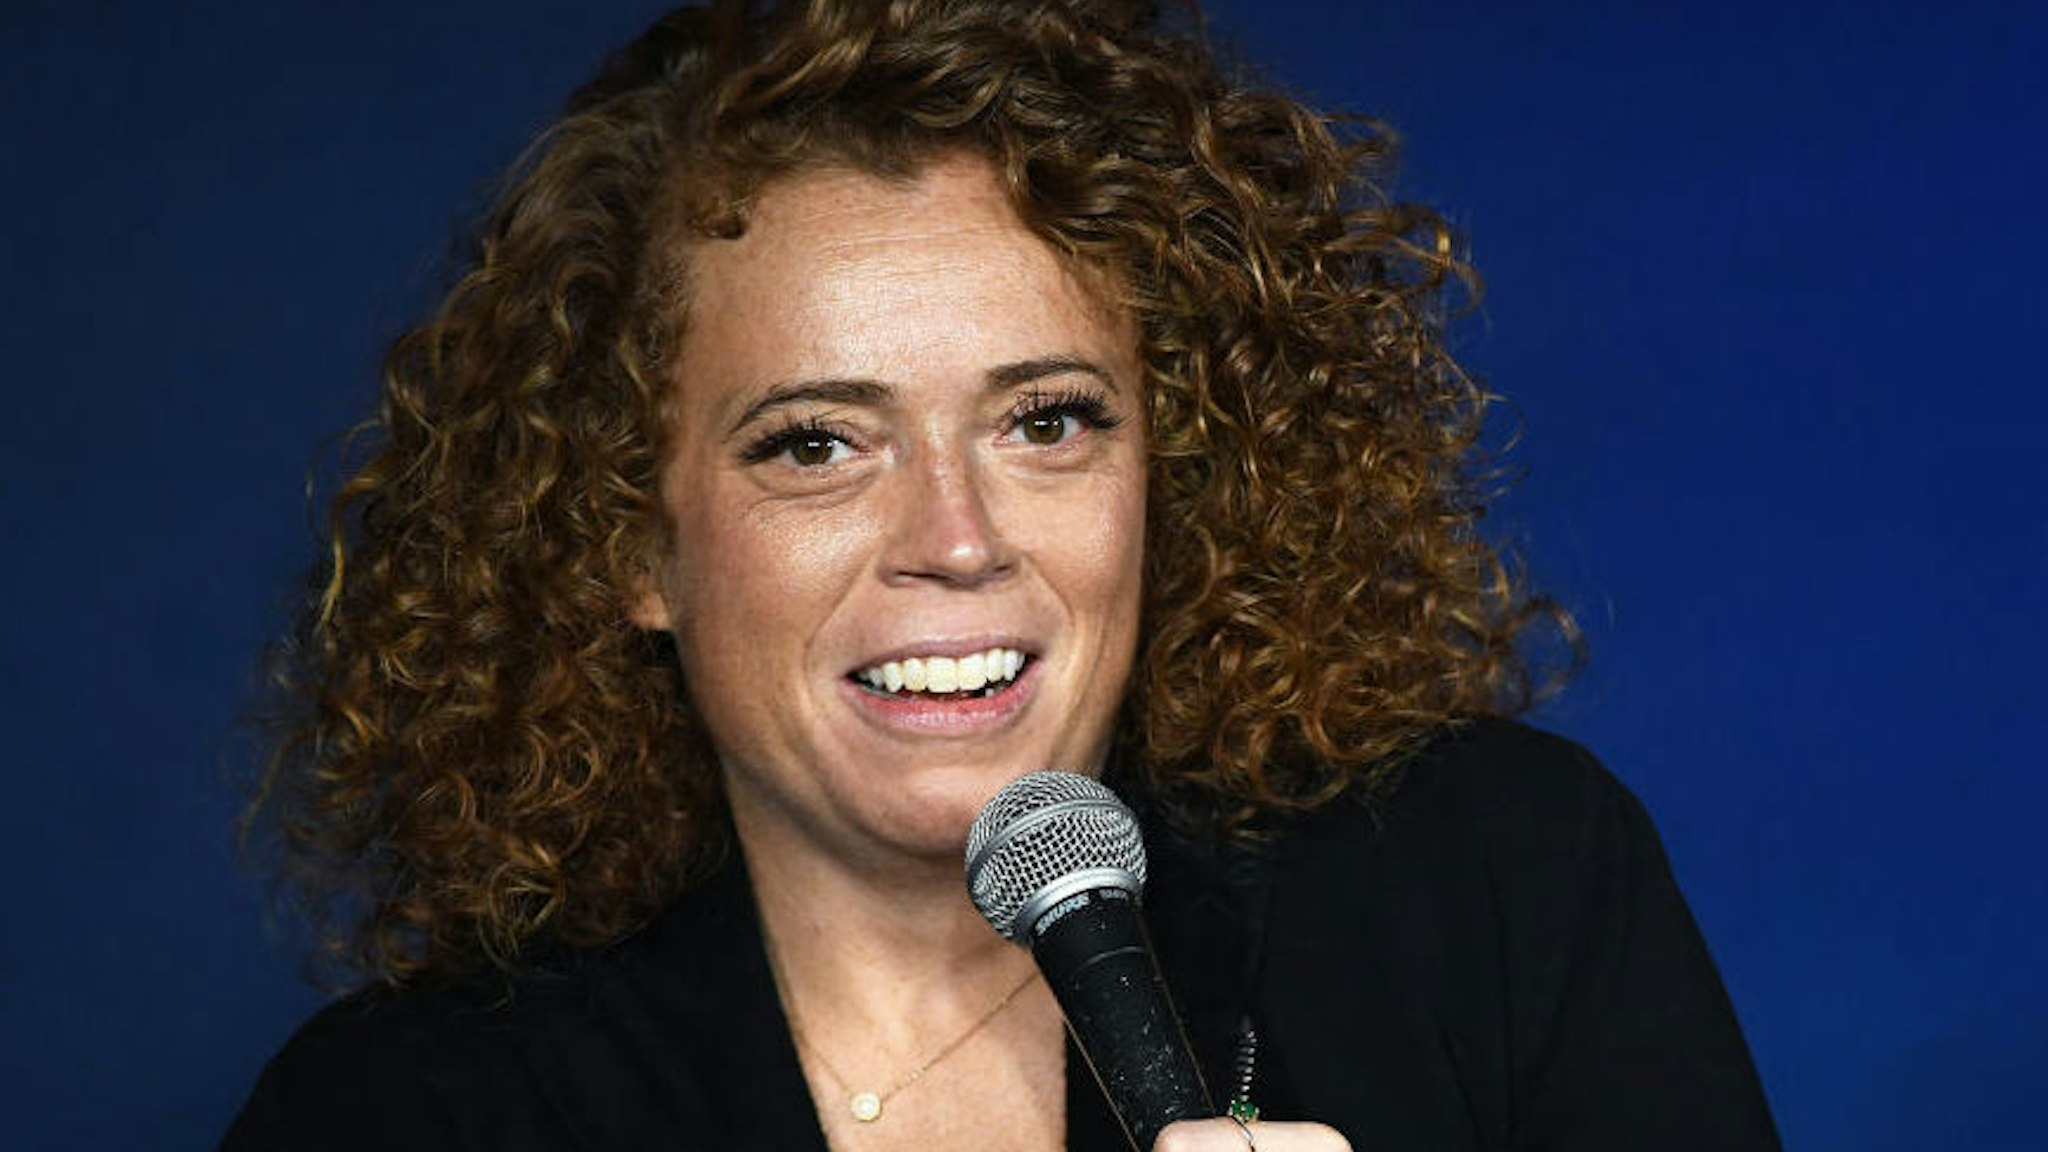 PASADENA, CALIFORNIA - DECEMBER 06: Comedian Michelle Wolf performs during her appearance at The Ice House Comedy Club on December 06, 2019 in Pasadena, California.